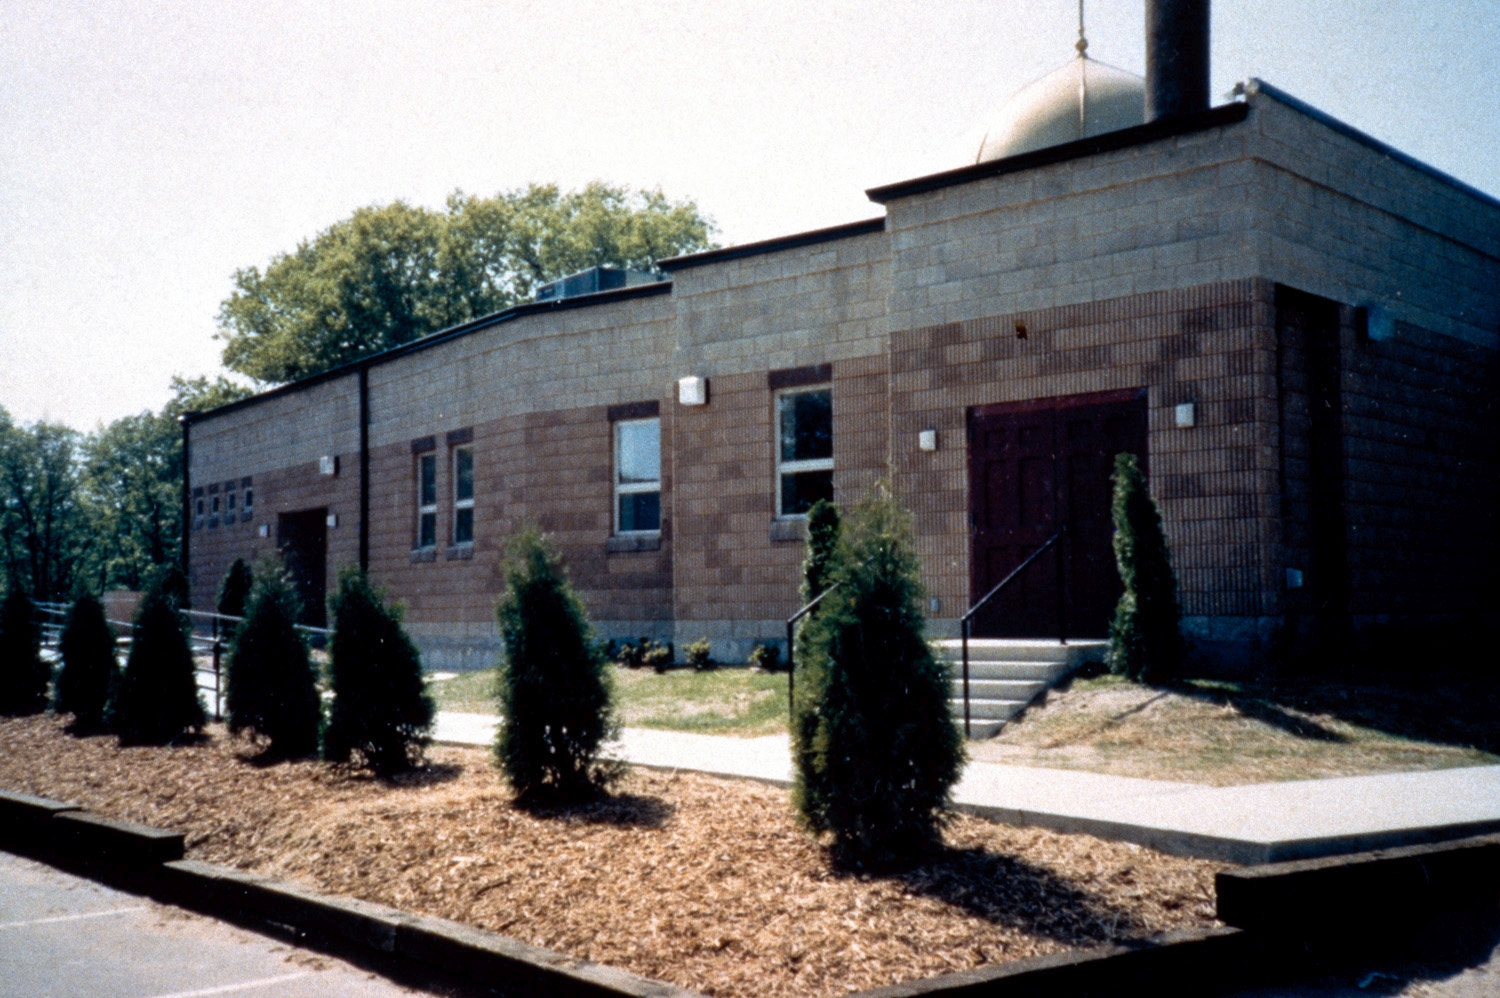 Islamic Society of Western Massachusetts - Southern elevation of original mosque building before expansion